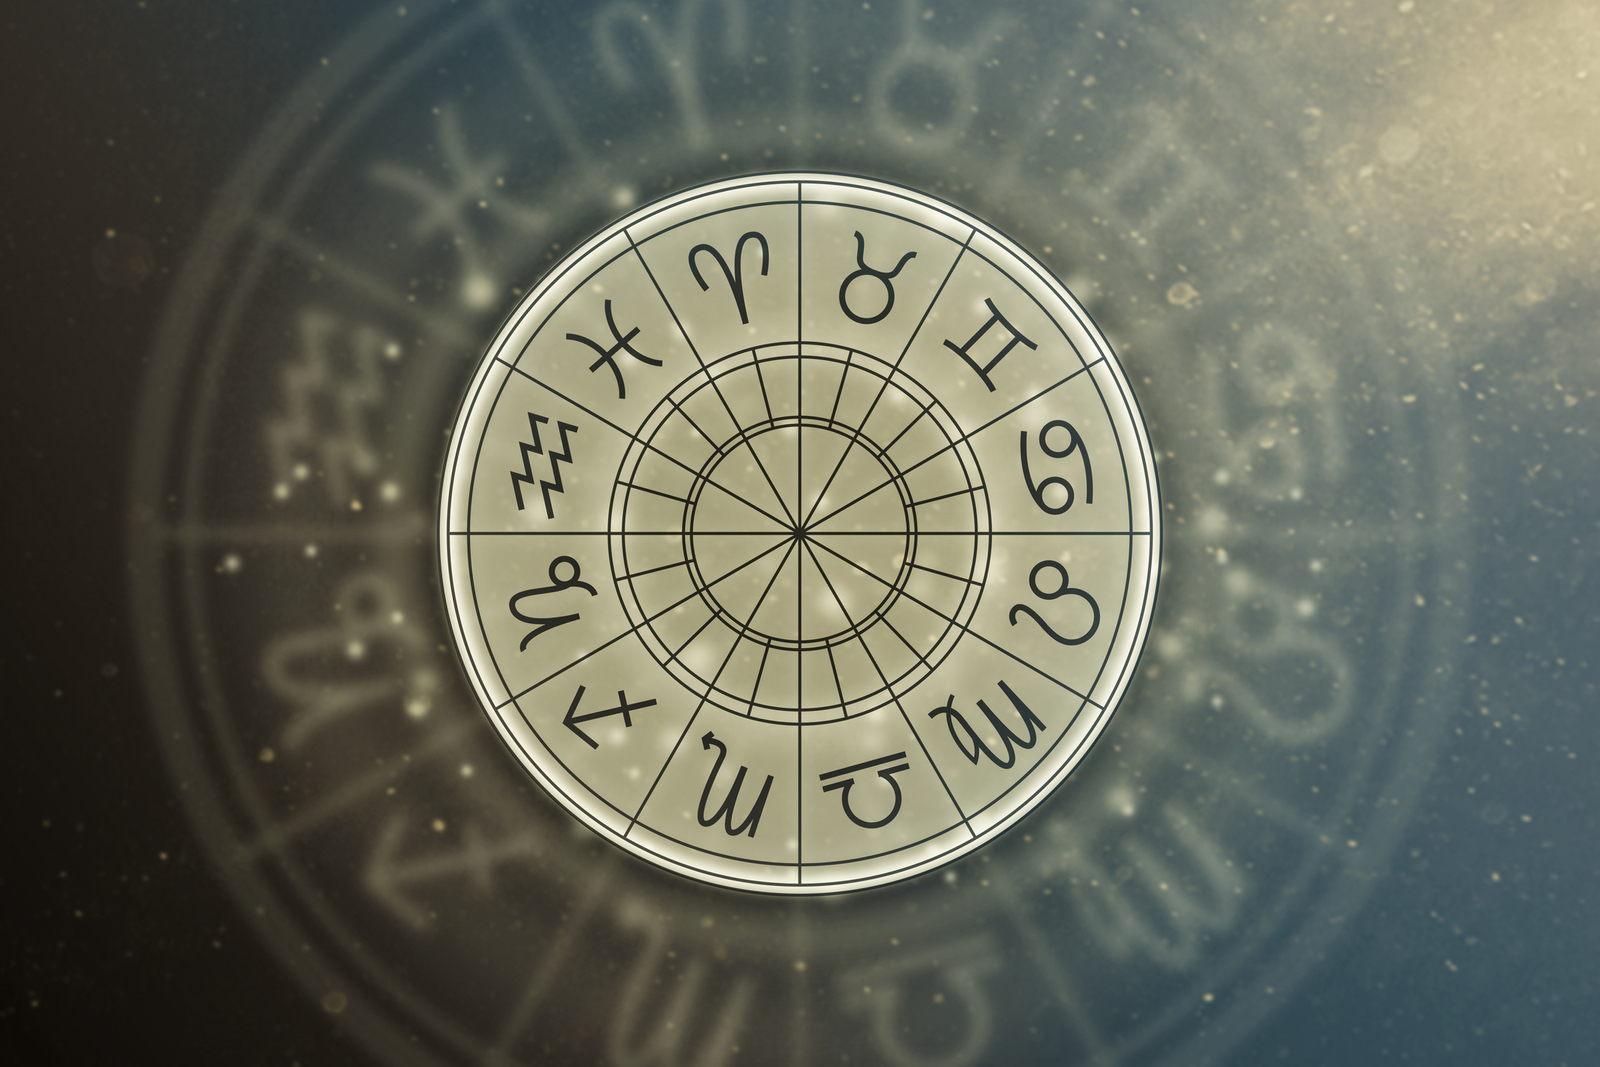 The 12 signs of the Zodiac on a grayish color wheel